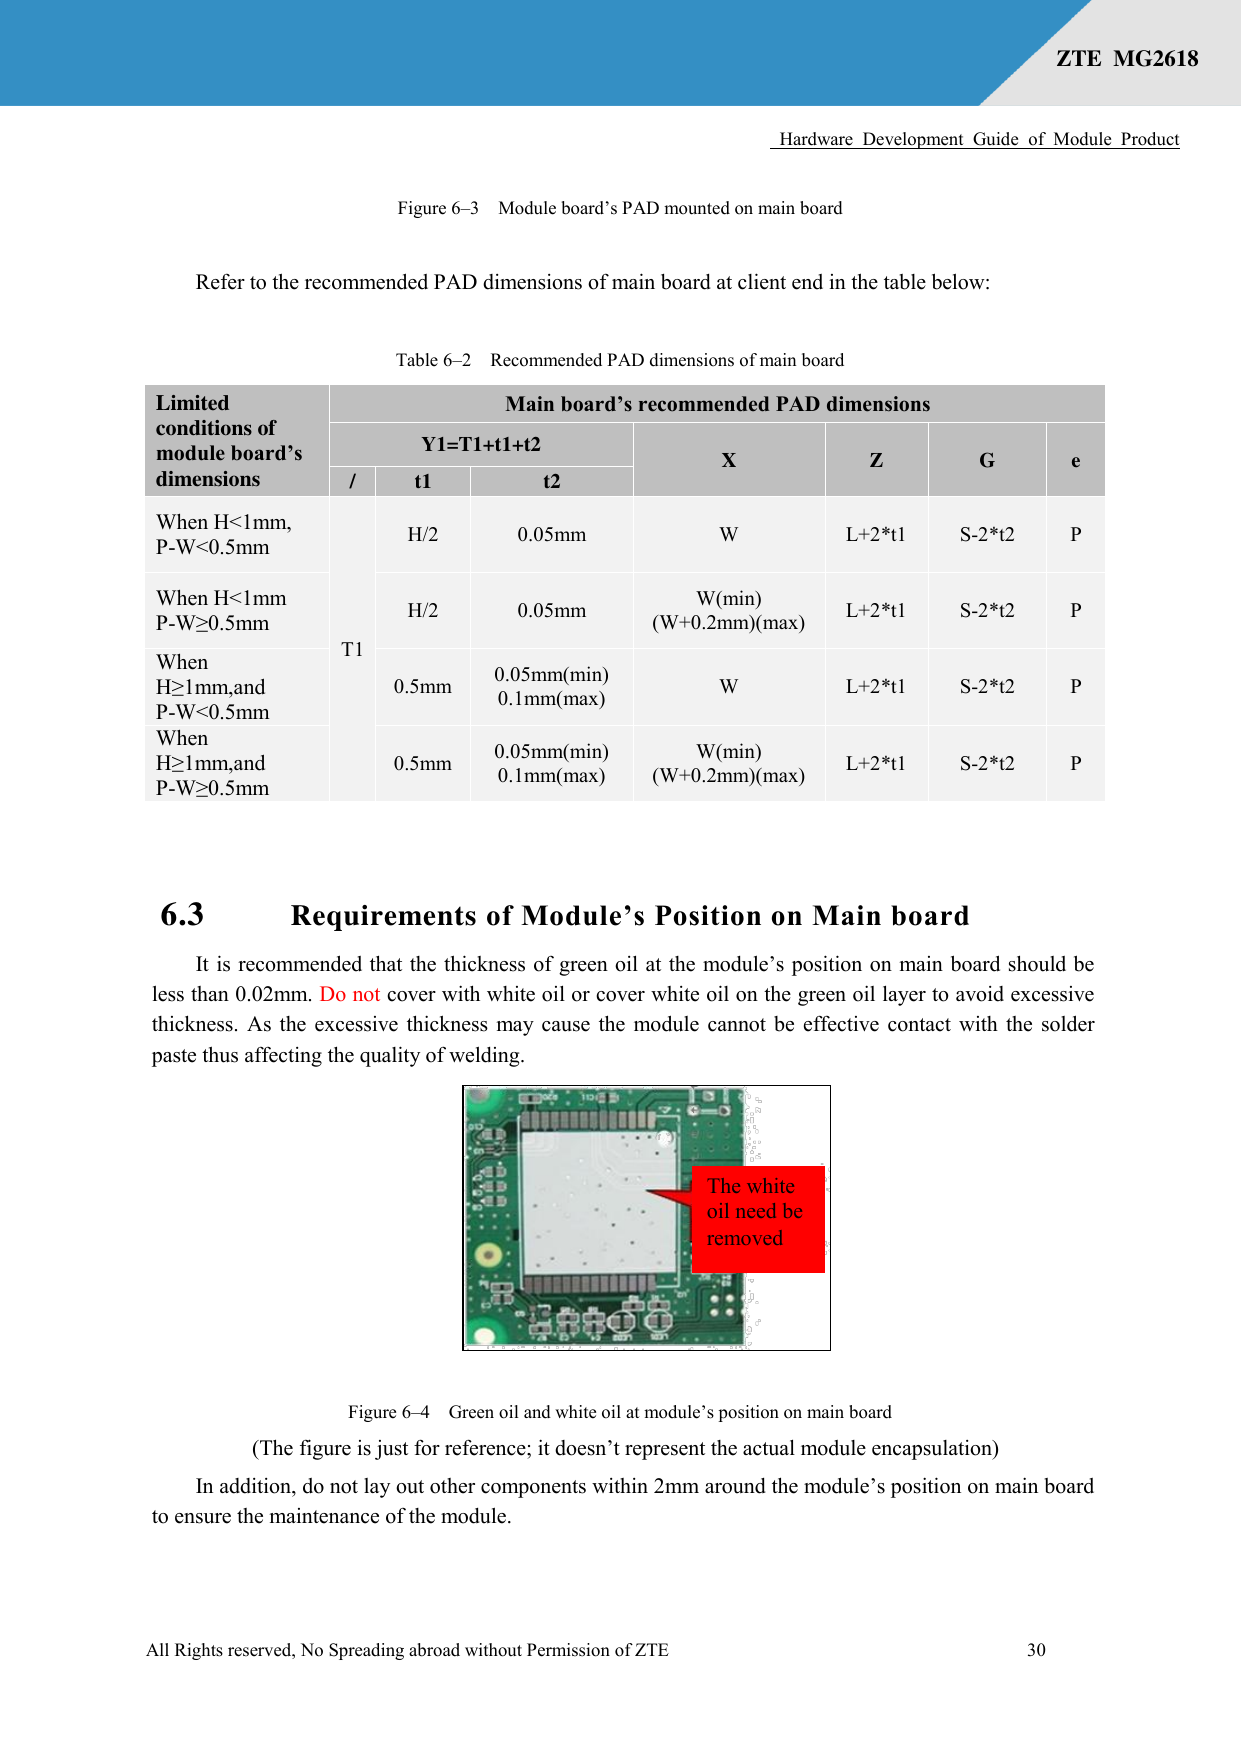      Hardware  Development  Guide  of  Module  Product  All Rights reserved, No Spreading abroad without Permission of ZTE              30 ZTE  MG2618   Figure 6–3  Module board’s PAD mounted on main board  Refer to the recommended PAD dimensions of main board at client end in the table below: Table 6–2  Recommended PAD dimensions of main board Limited conditions of module board’s dimensions Main board’s recommended PAD dimensions Y1=T1+t1+t2 X Z G e / t1 t2 When H&lt;1mm, P-W&lt;0.5mm T1 H/2 0.05mm W L+2*t1 S-2*t2 P When H&lt;1mm P-W≥0.5mm H/2 0.05mm W(min) (W+0.2mm)(max) L+2*t1 S-2*t2 P When H≥1mm,and   P-W&lt;0.5mm 0.5mm 0.05mm(min) 0.1mm(max) W L+2*t1 S-2*t2 P When H≥1mm,and   P-W≥0.5mm 0.5mm 0.05mm(min) 0.1mm(max) W(min) (W+0.2mm)(max) L+2*t1 S-2*t2 P  6.3 Requirements of Module’s Position on Main board It is recommended that the thickness of green oil at the module’s position on main board should be less than 0.02mm. Do not cover with white oil or cover white oil on the green oil layer to avoid excessive thickness. As the excessive thickness may cause the module cannot be effective contact with the solder paste thus affecting the quality of welding.  Figure 6–4  Green oil and white oil at module’s position on main board    (The figure is just for reference; it doesn’t represent the actual module encapsulation) In addition, do not lay out other components within 2mm around the module’s position on main board to ensure the maintenance of the module. The white oil need be removed 